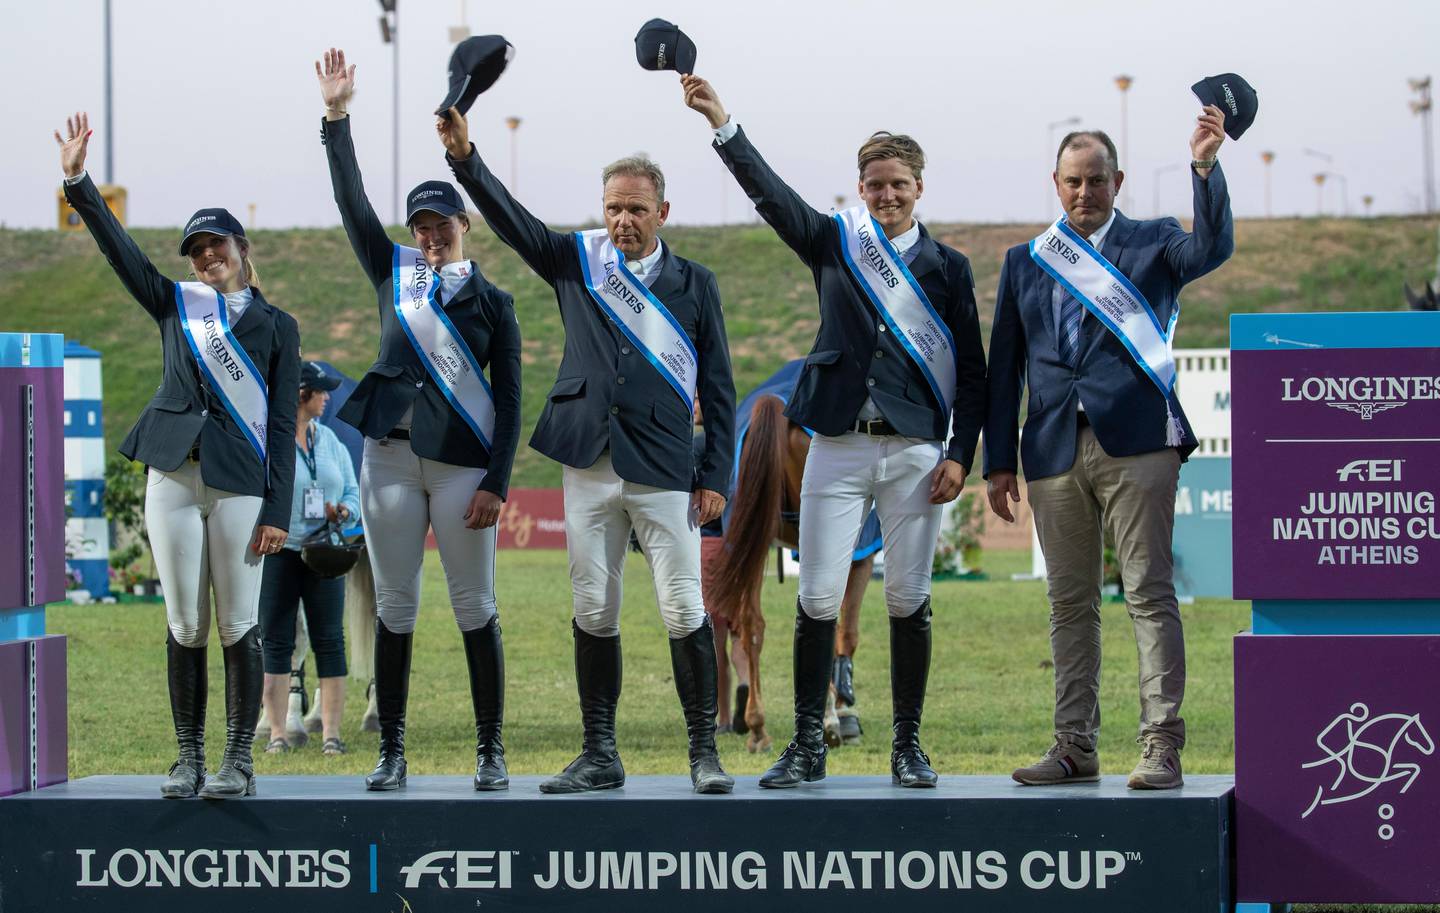 Victoria Gulliksen (L) Hege C Tidemandsen (2L) Geir Gulliksen (3L) and and Johan-Sebastian Gulliksen (4L) with Chef d'equine Mikael Kolind (R) with their caps off on the podium as they celebrate winning the Longines FEI Jumping Nations Cup of Greece in the Markopoulo Olympic Stadium Equestrian Center in Markopoulo, Greece, 28 July 2019. Norway won the event and Portugal came in second.